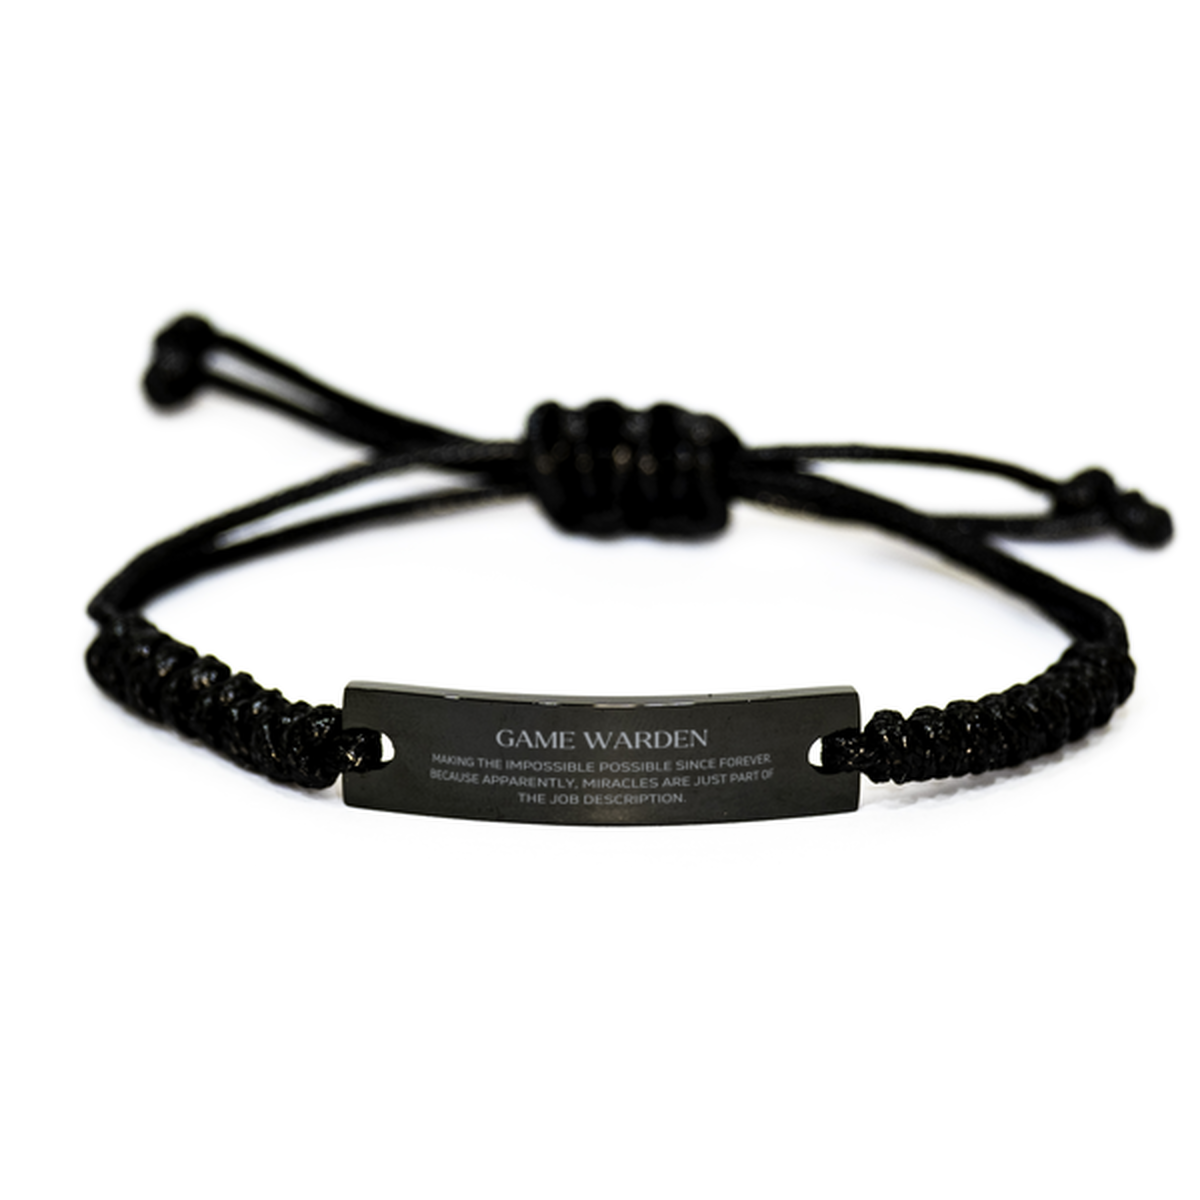 Funny Game Warden Gifts, Miracles are just part of the job description, Inspirational Birthday Black Rope Bracelet For Game Warden, Men, Women, Coworkers, Friends, Boss